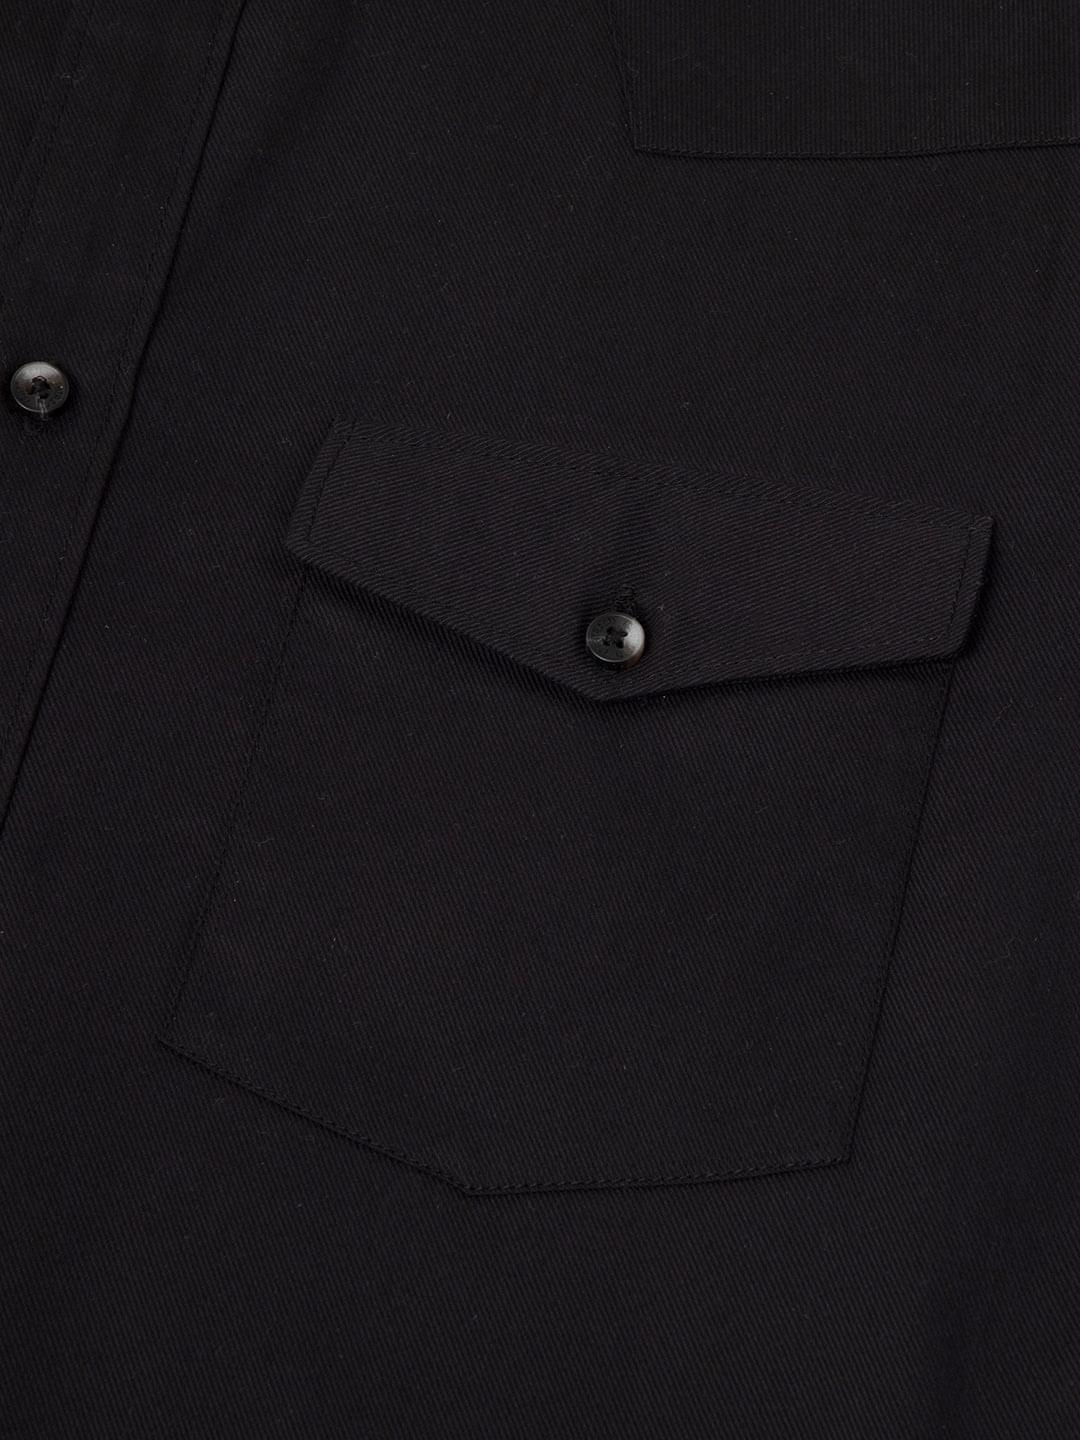 Cargo Twill Shirt in Raven Black- Comfort Fit